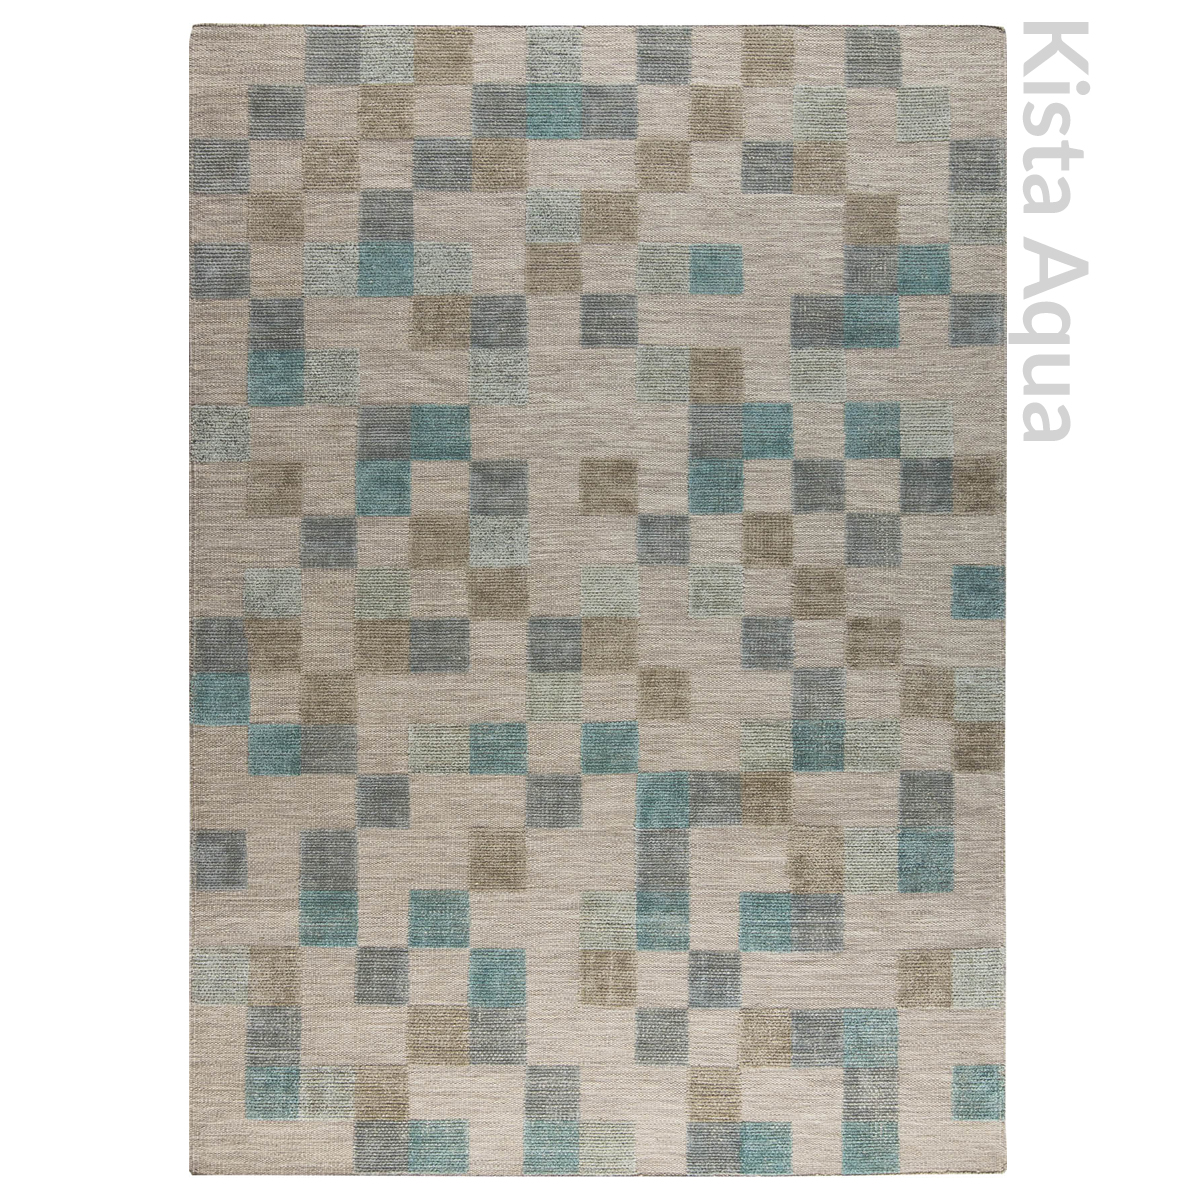 Squares are scattered about the surface of the Kista rug, a beautiful, contemporary rug that instantly updates any room.

Enquire Now 👉 bit.ly/4djQtha

#bespoke #manufacturing #artisan #homedesign #inspiration #design #designtrends #trend #interiors #interiorstyle